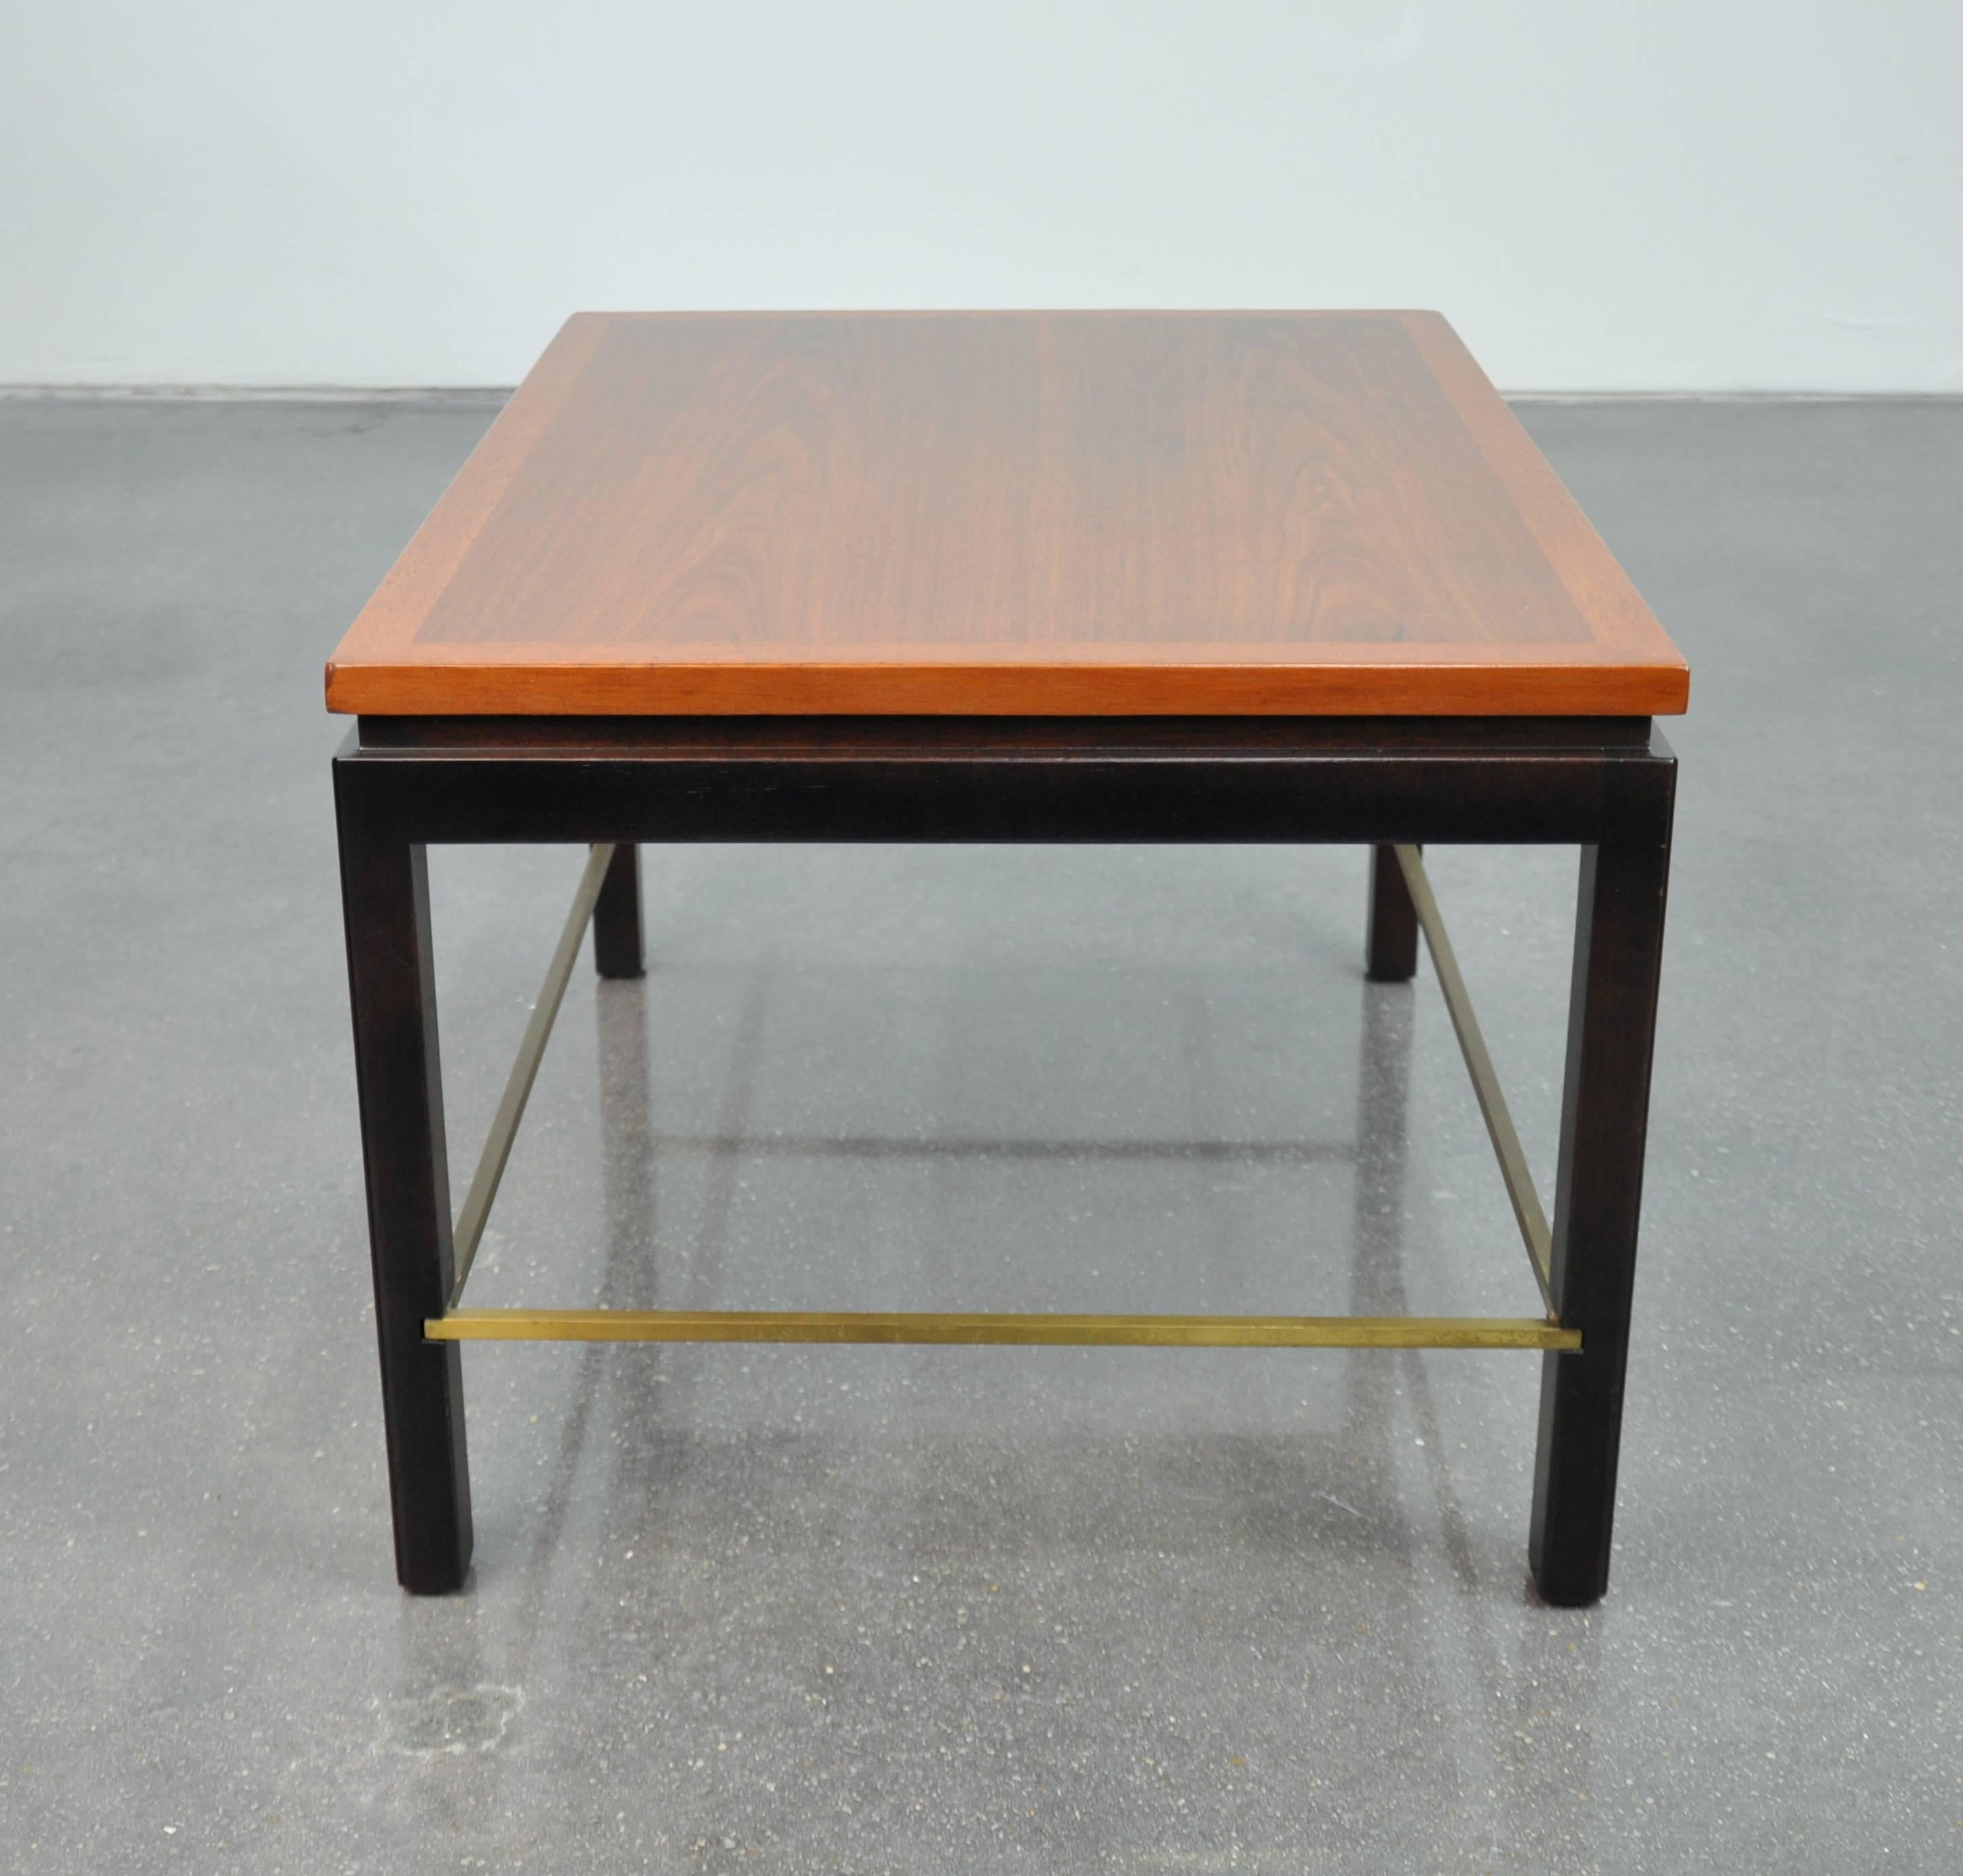 A vintage Mid-Century Modern model 310 end or occasional table designed by Edward Wormley for Dunbar and dating from the 1950s. The rectangular top appears to float over a recessed Parsons style ebonized mahogany base connected with inset brass